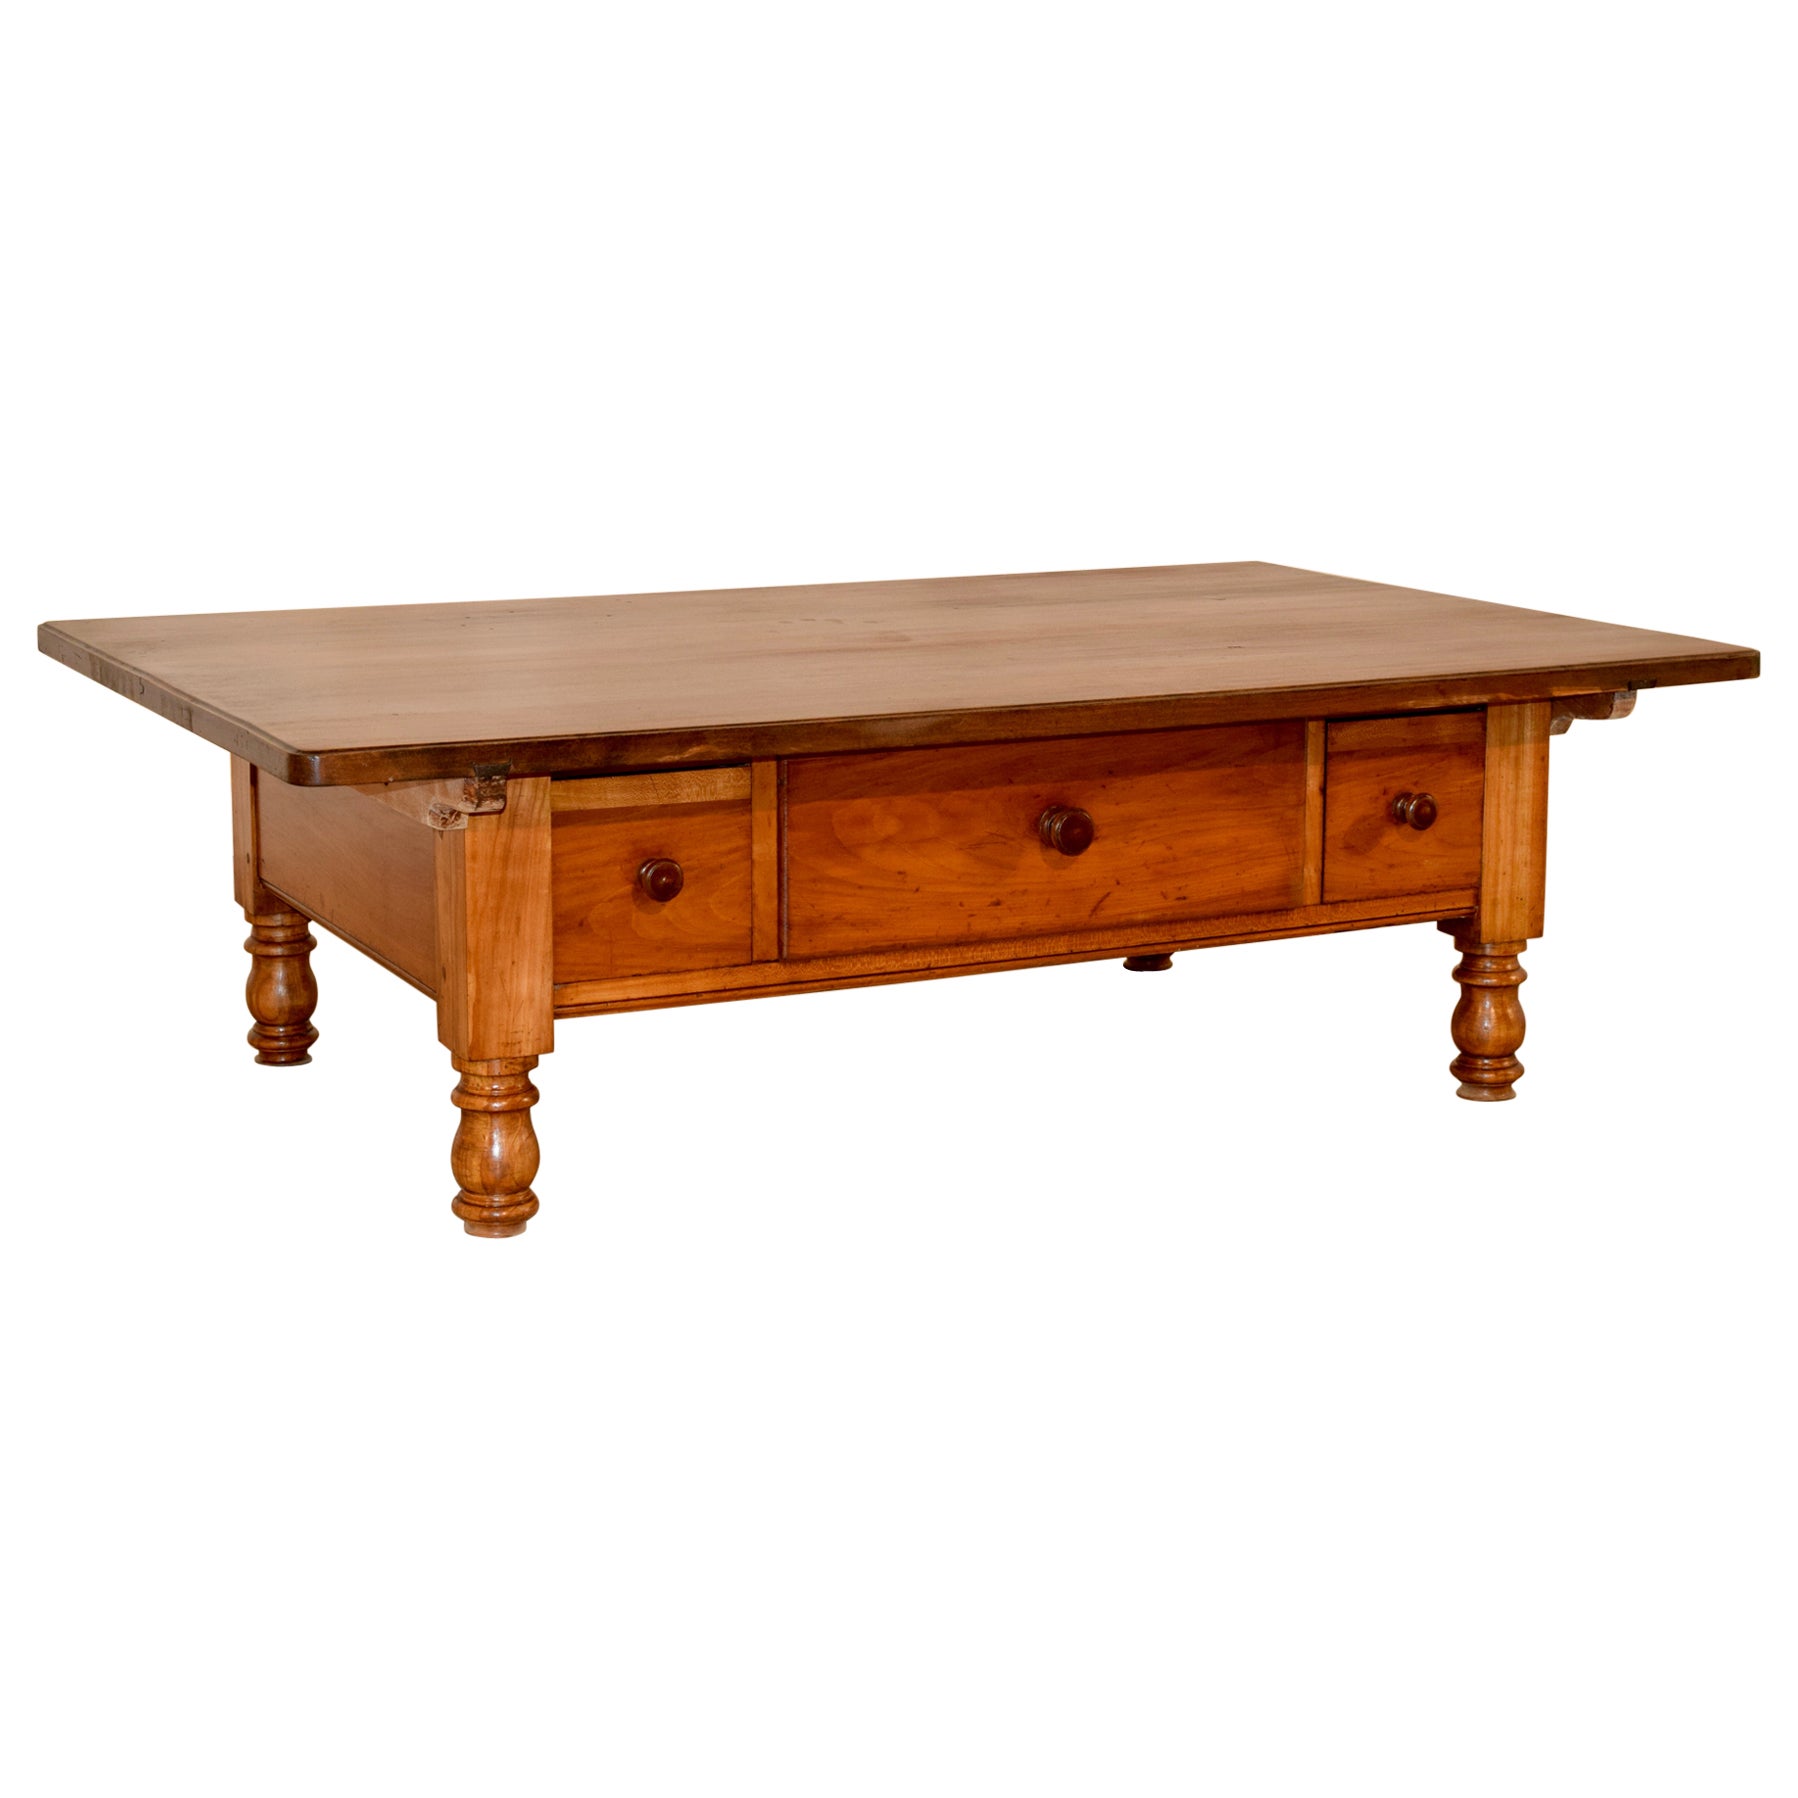 18th Century Swiss Cherry Coffee Table with Three Drawers